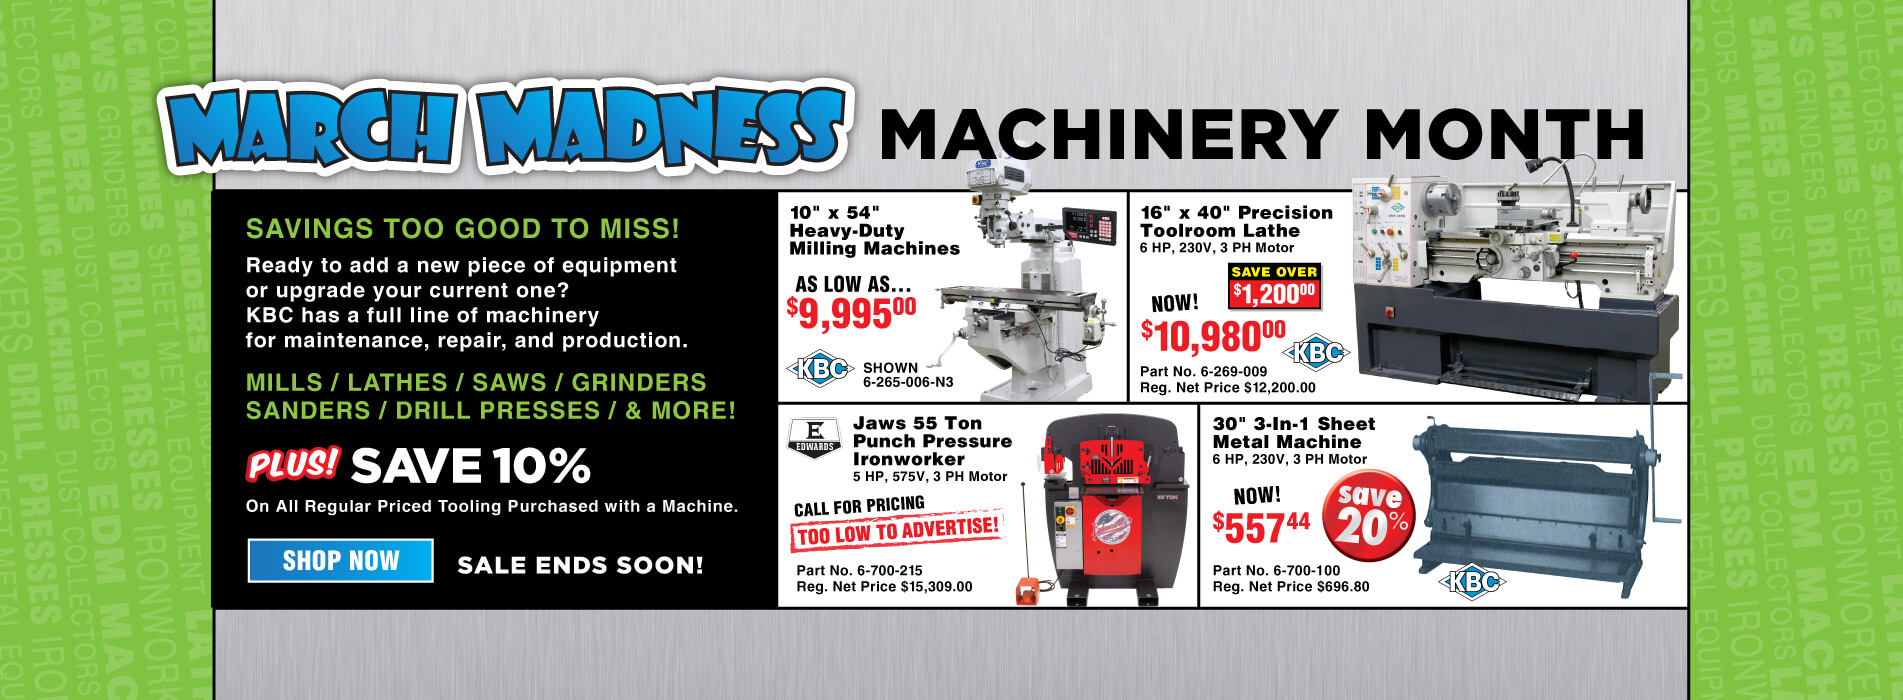 Machinery Madness: Unbeatable Deals on In-Stock Machines! Only this month: Grab your must-have machines at madness sale prices!